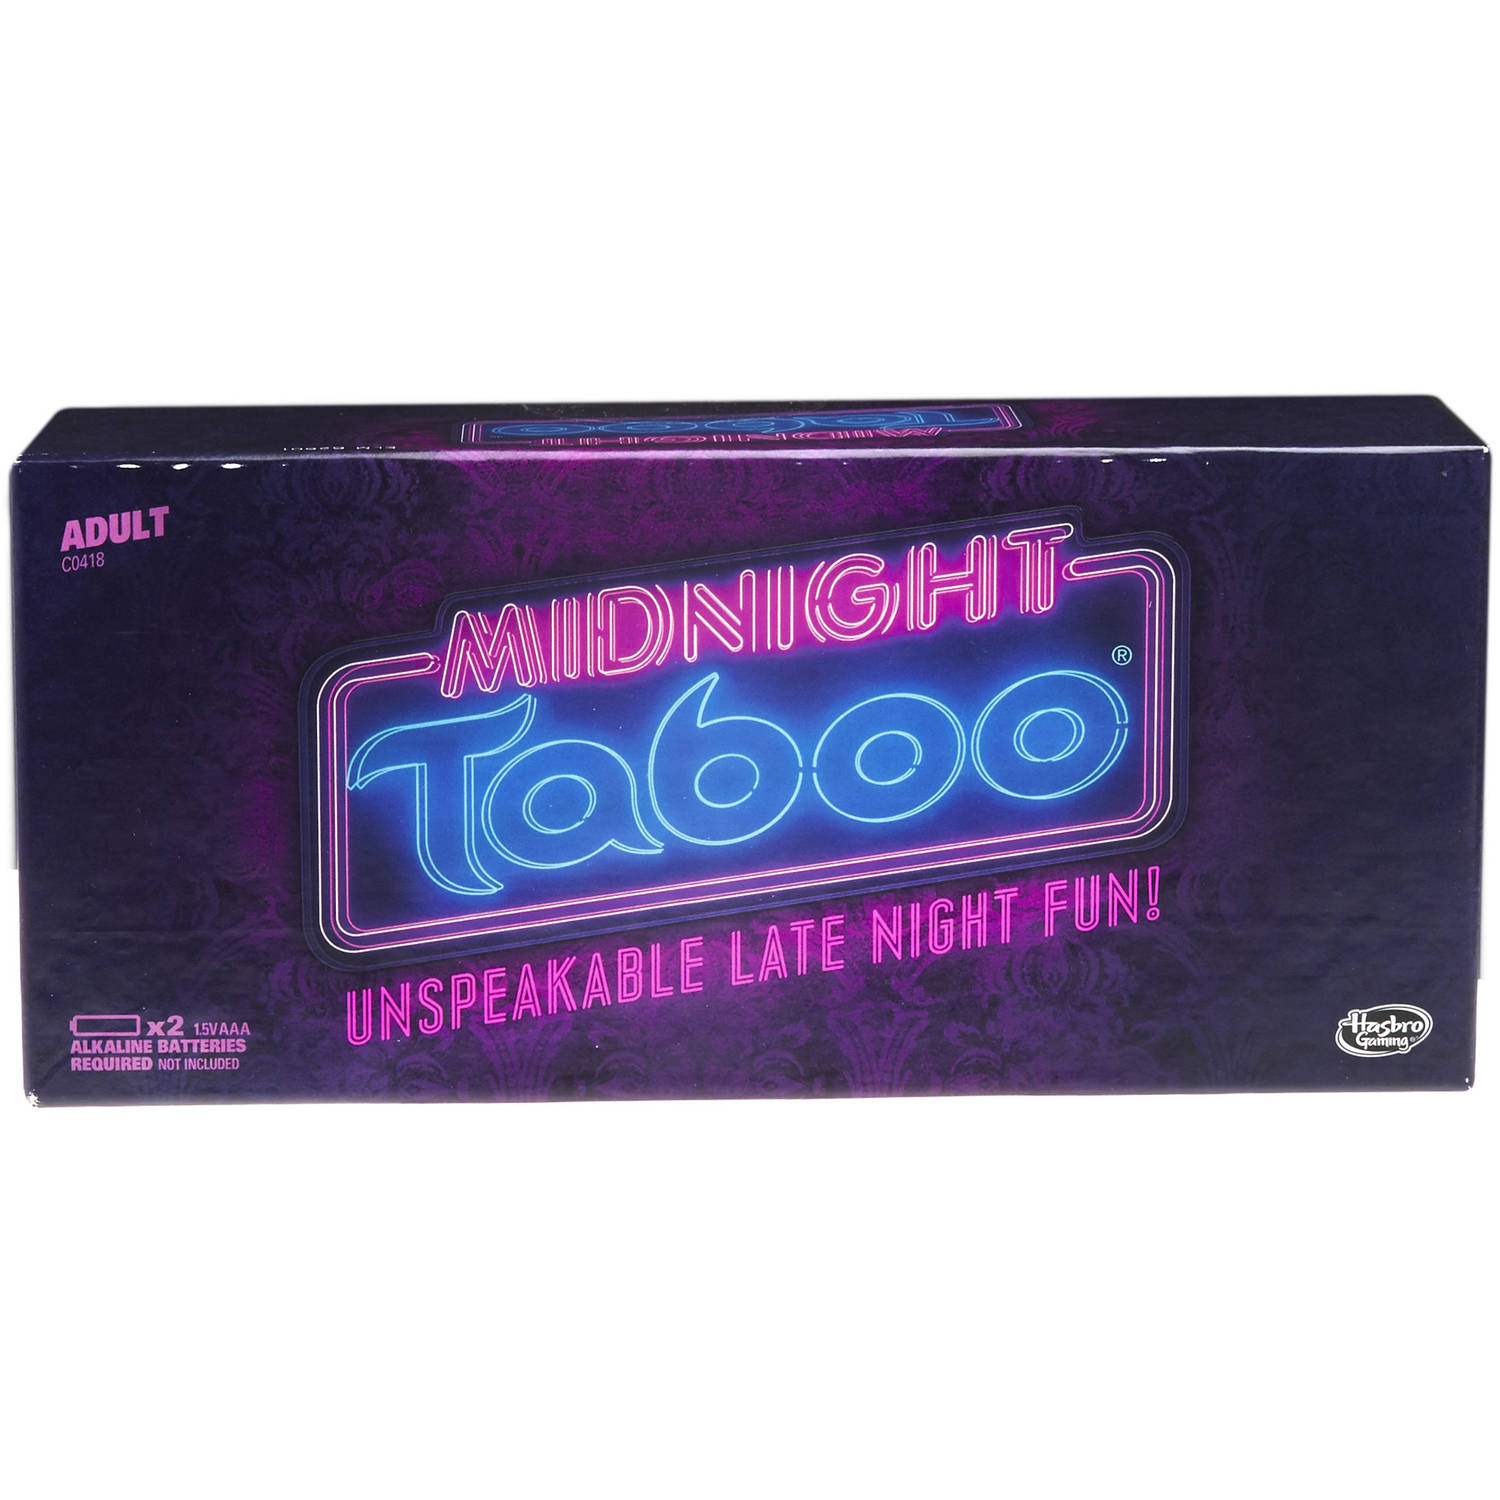 Adult taboo game